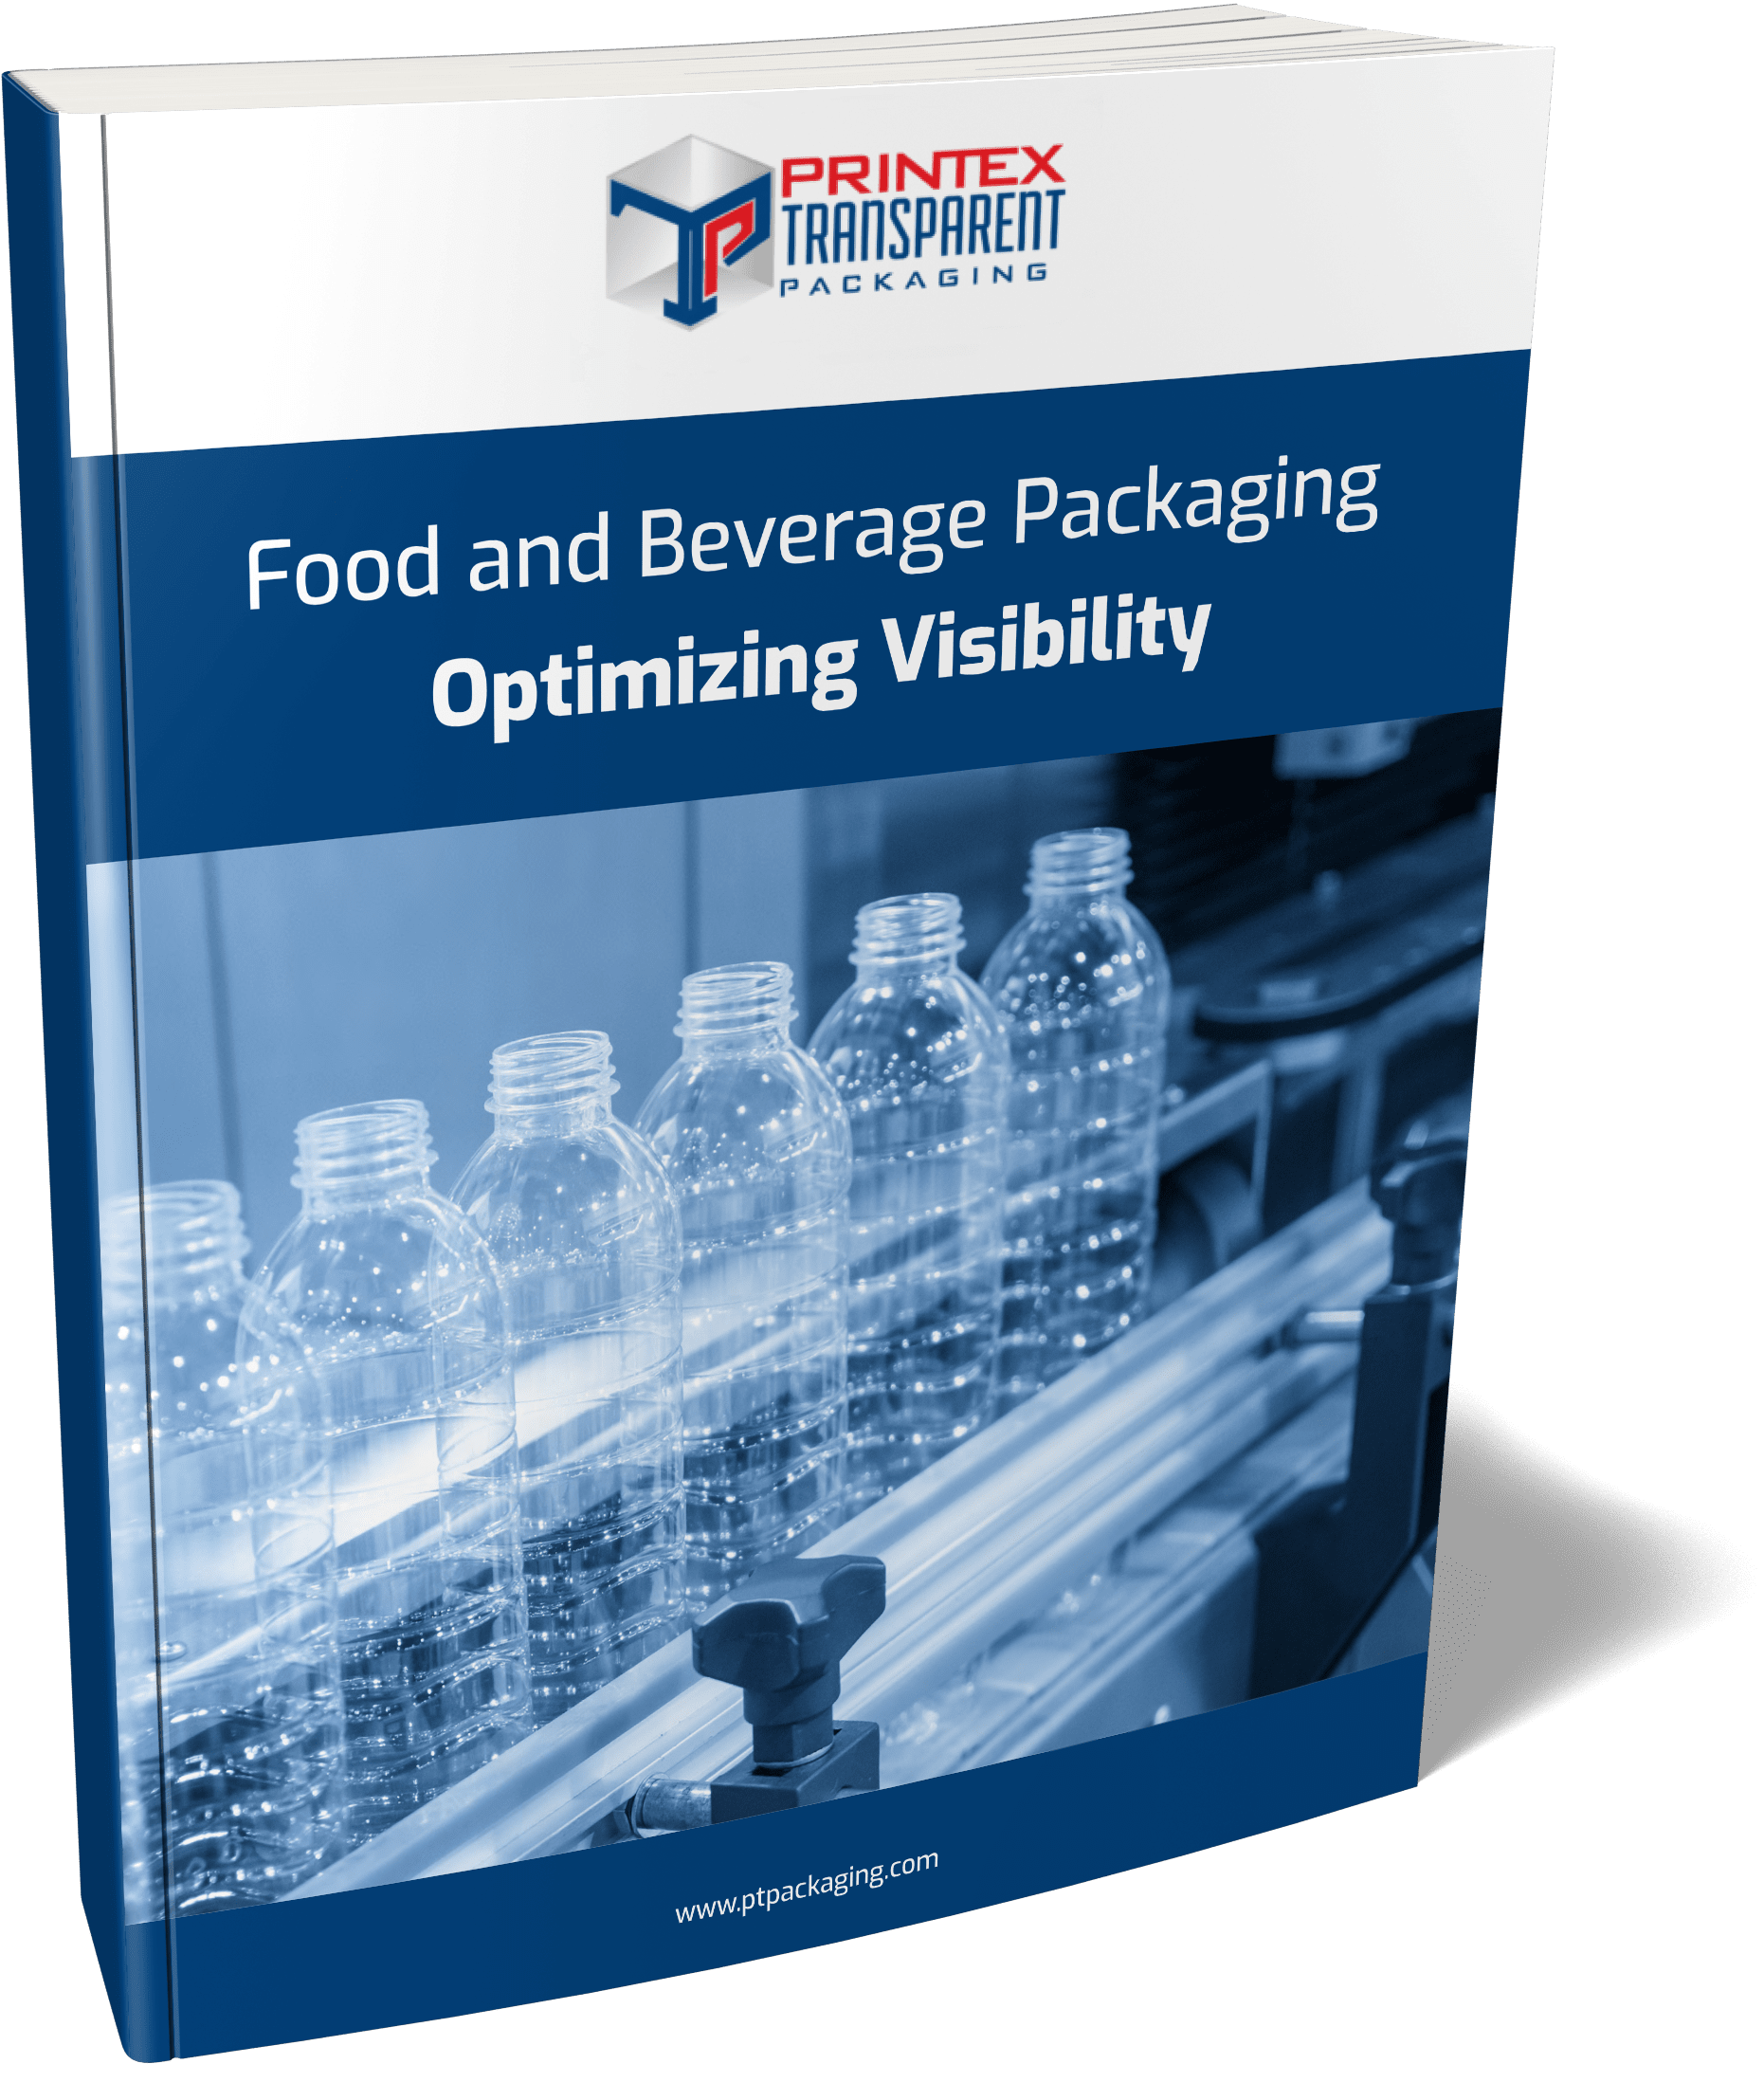 Food and Beverage Packaging Optimizing Visibility